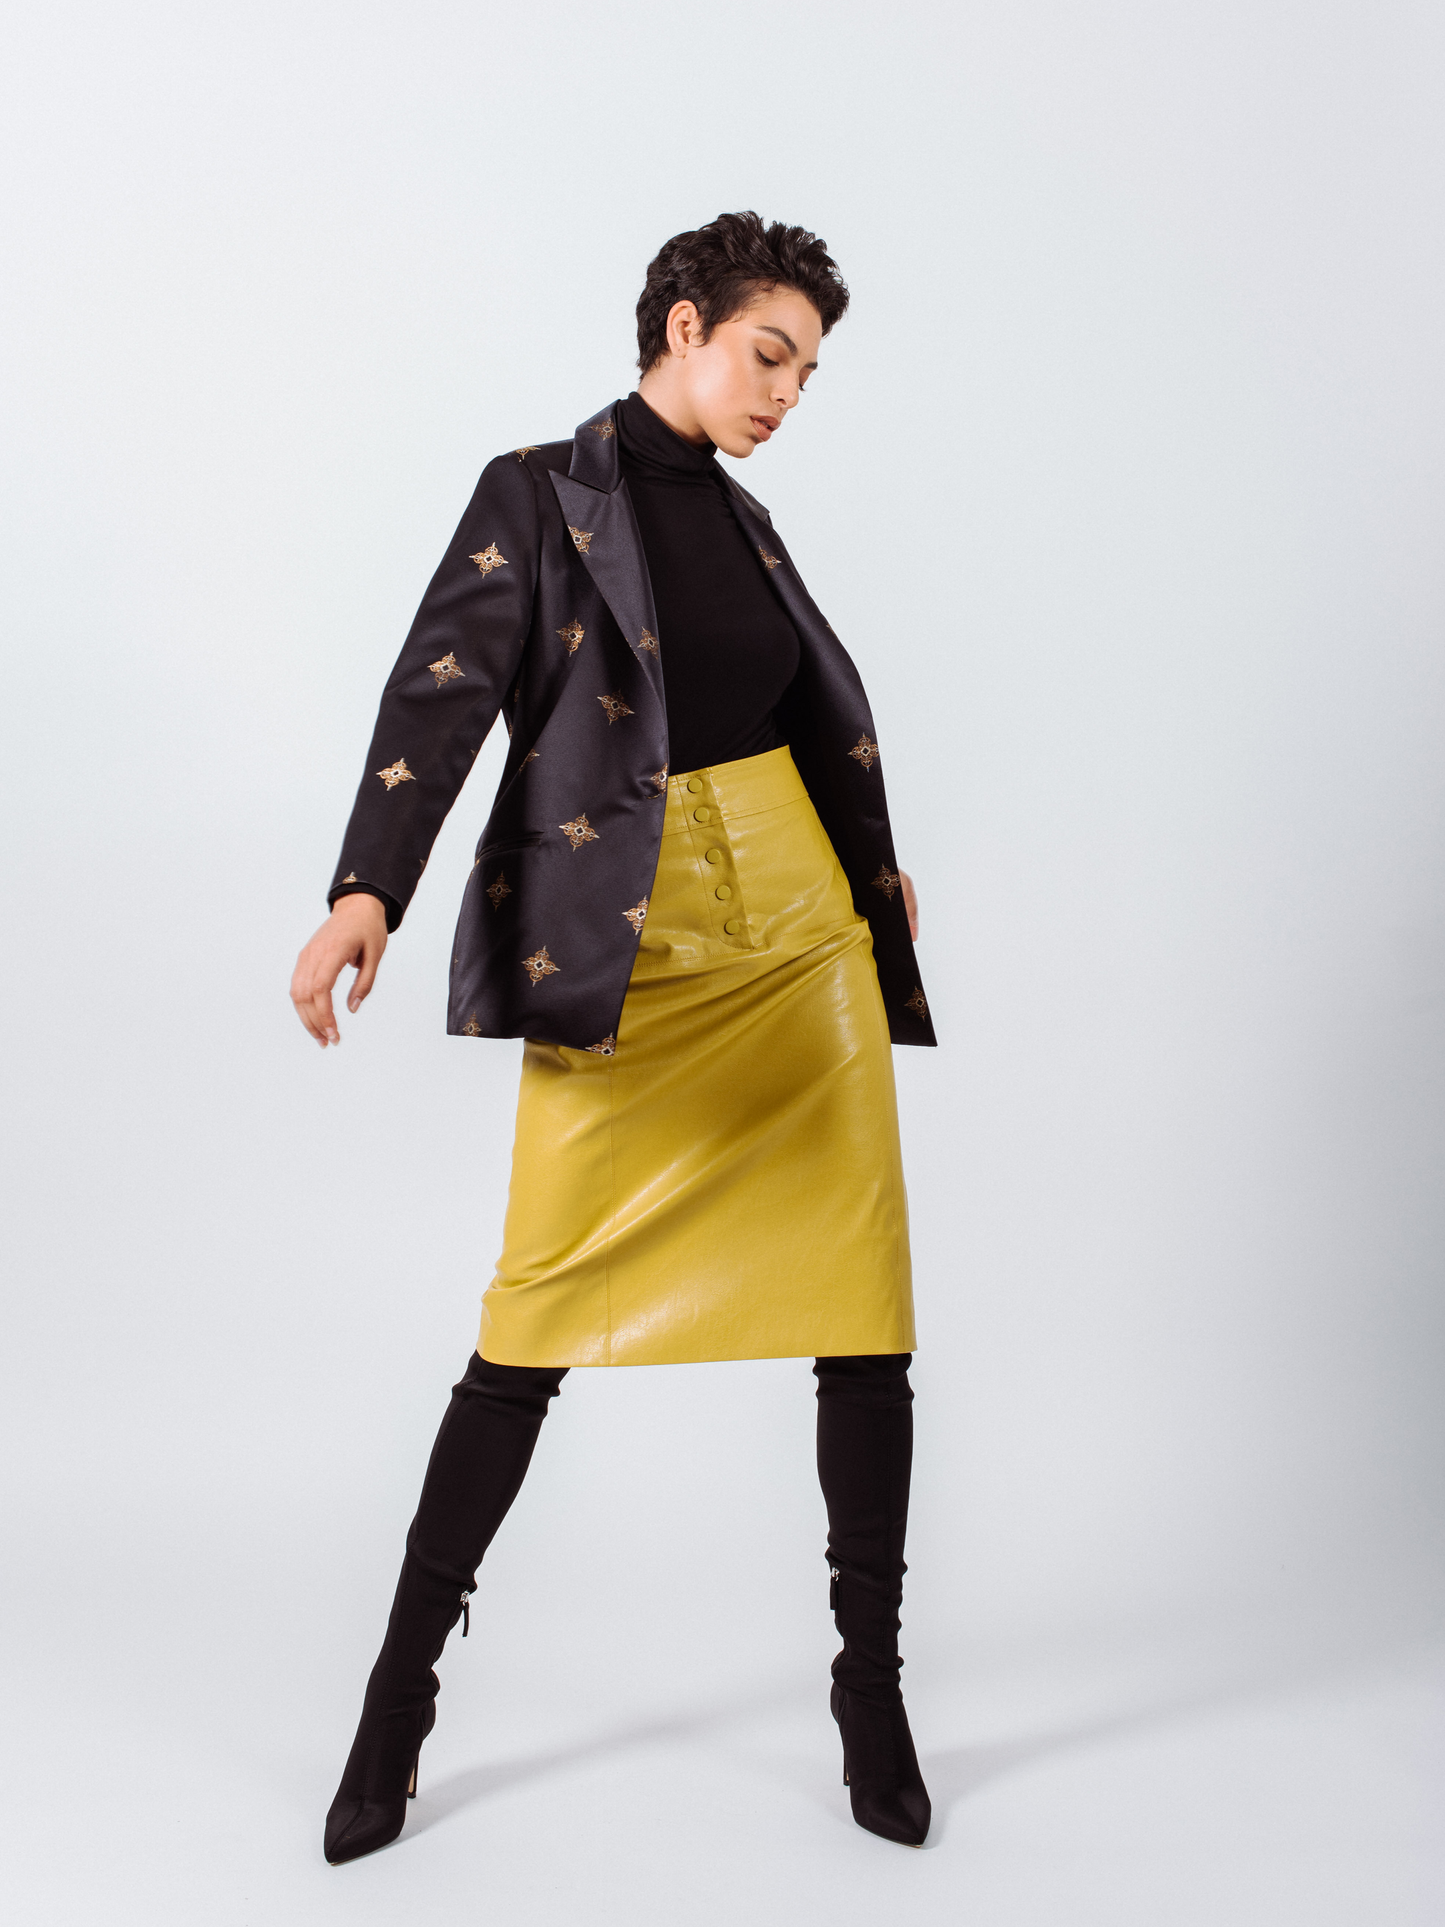 Woman in a black turtleneck, star-patterned jacket, Glossy Vegan Leather pencil skirt from Mauve Daisy, and black boots posing against a plain background.